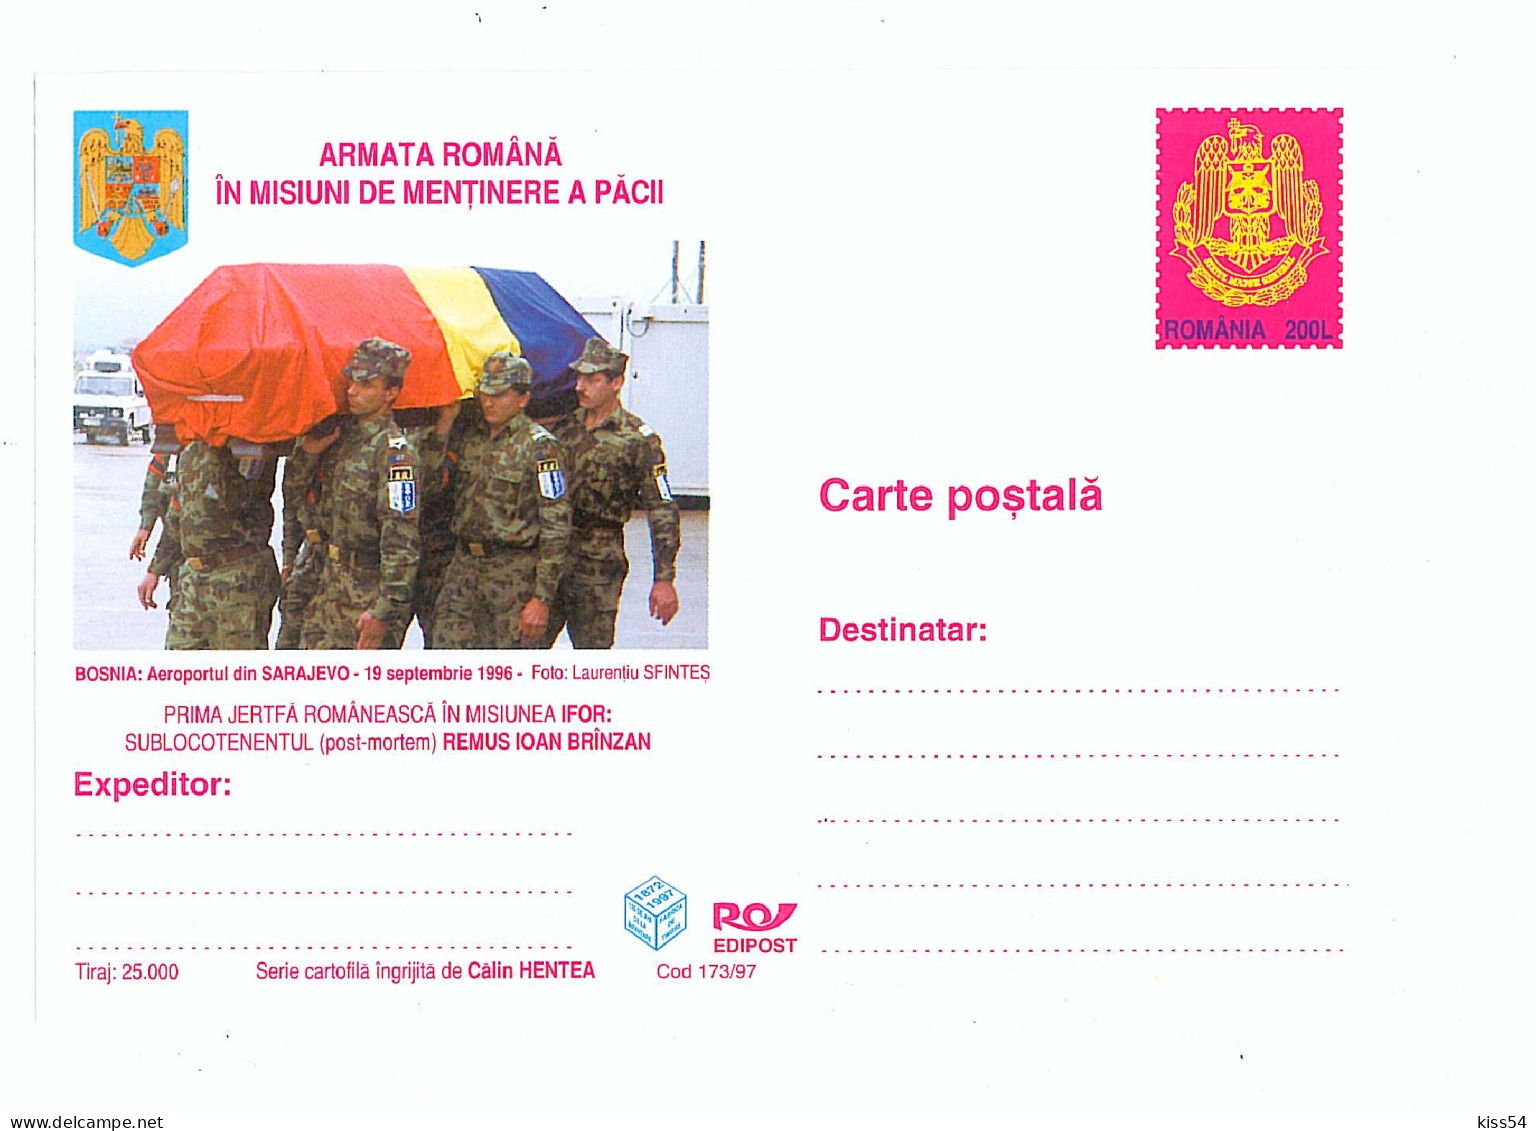 IP 97 - 173 NATO, Romanian Army In Peacekeeping Missions - Stationery - Unused - 1997 - Postal Stationery